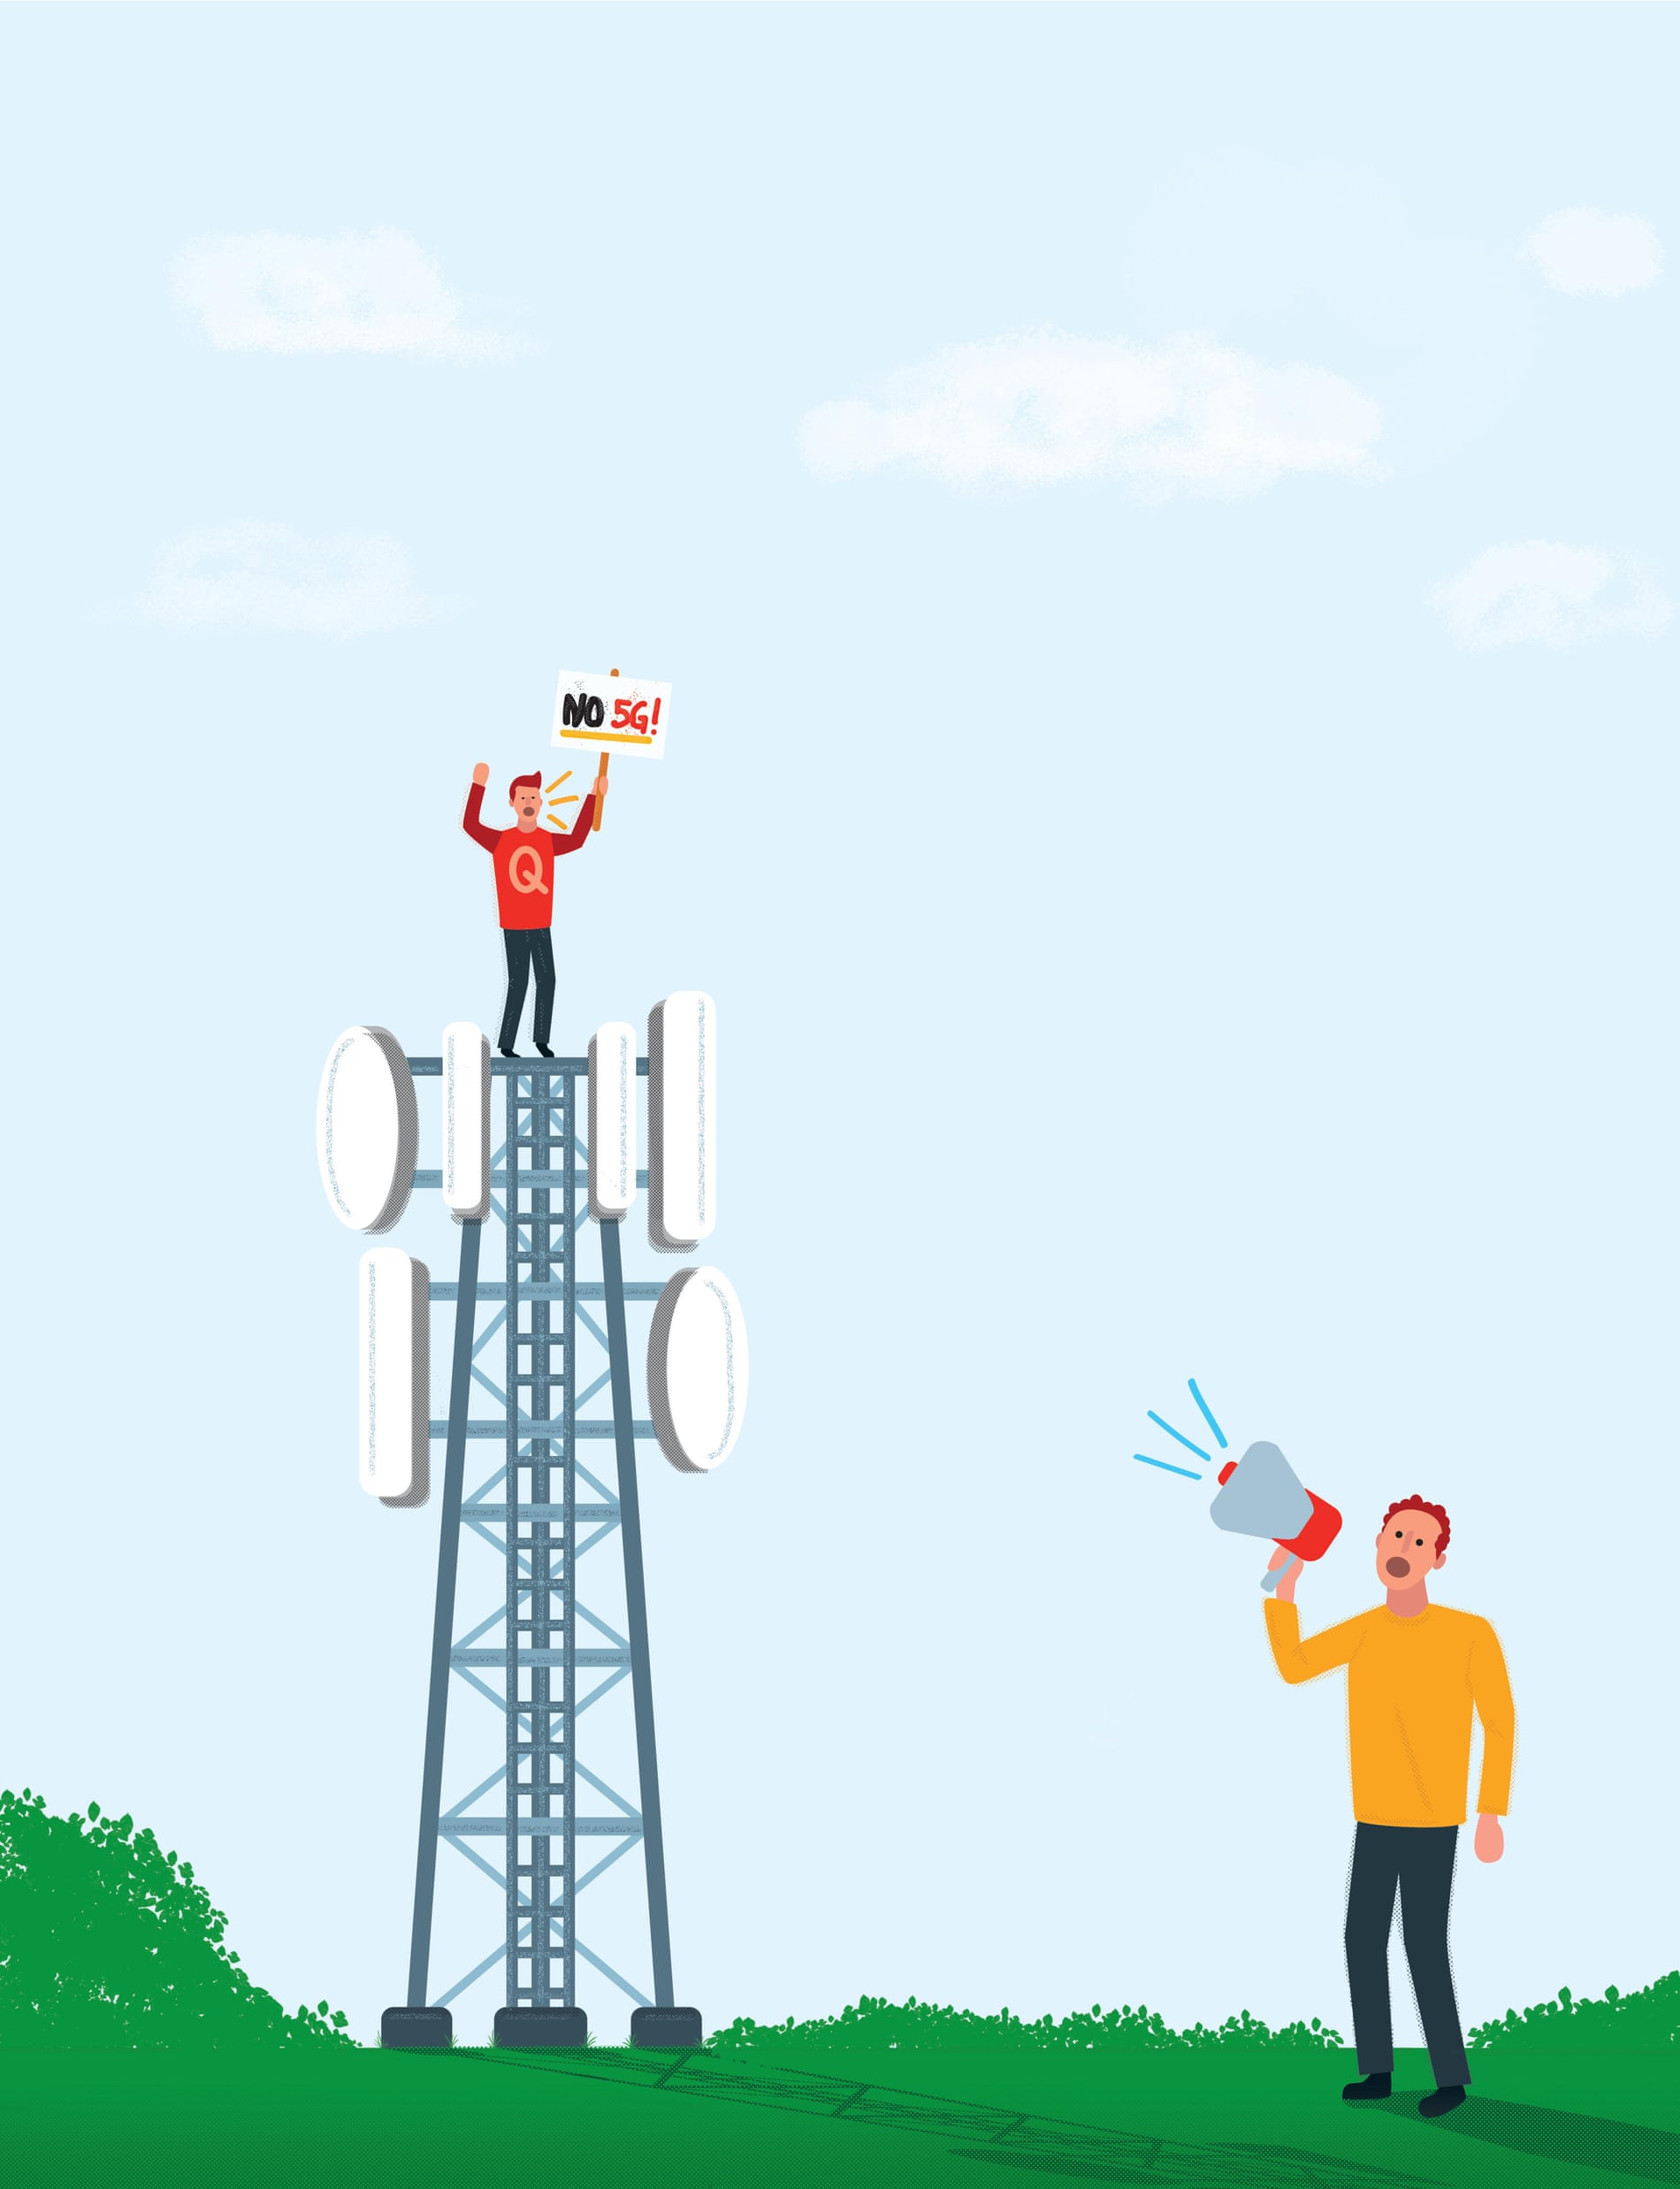 Illustration by James Melaugh of a man with a megaphone calling to a man on top of a 5G mast.